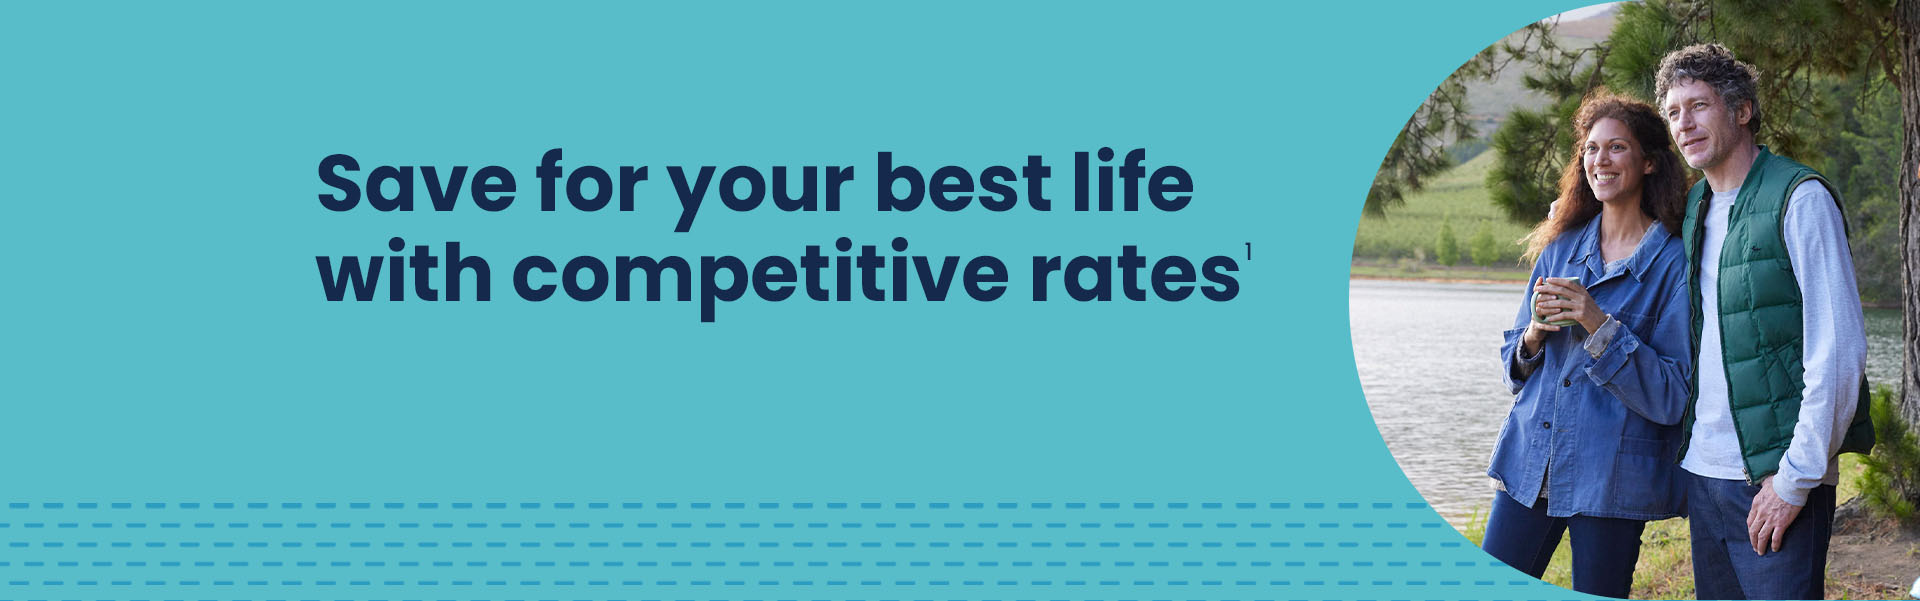 Save for your best life with competitive rates1